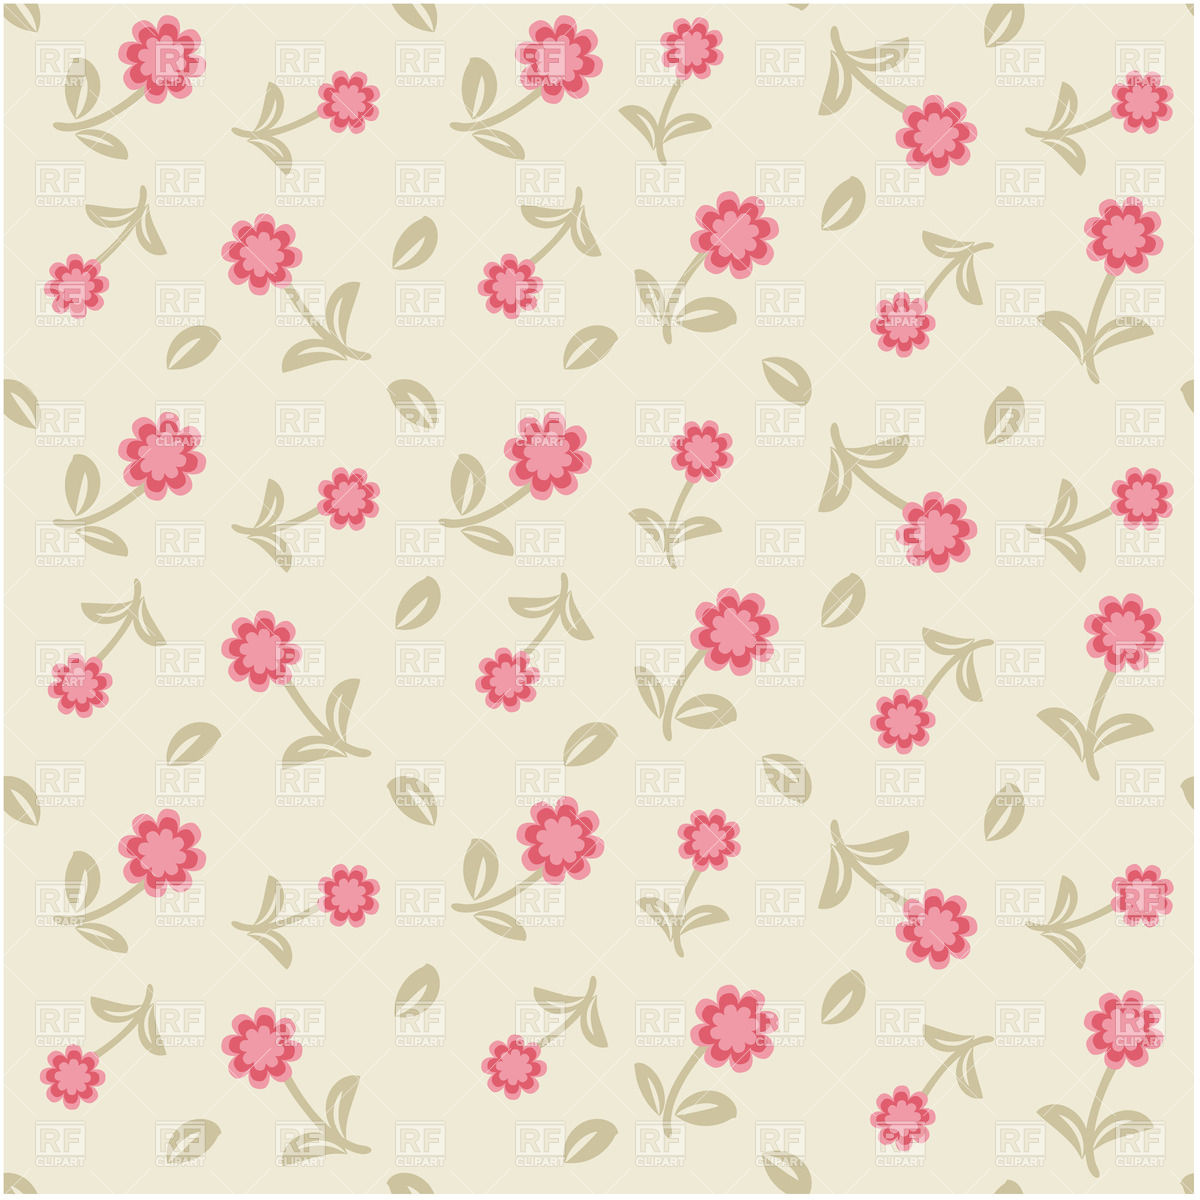 Cute Pastel Floral Seamless Background Background